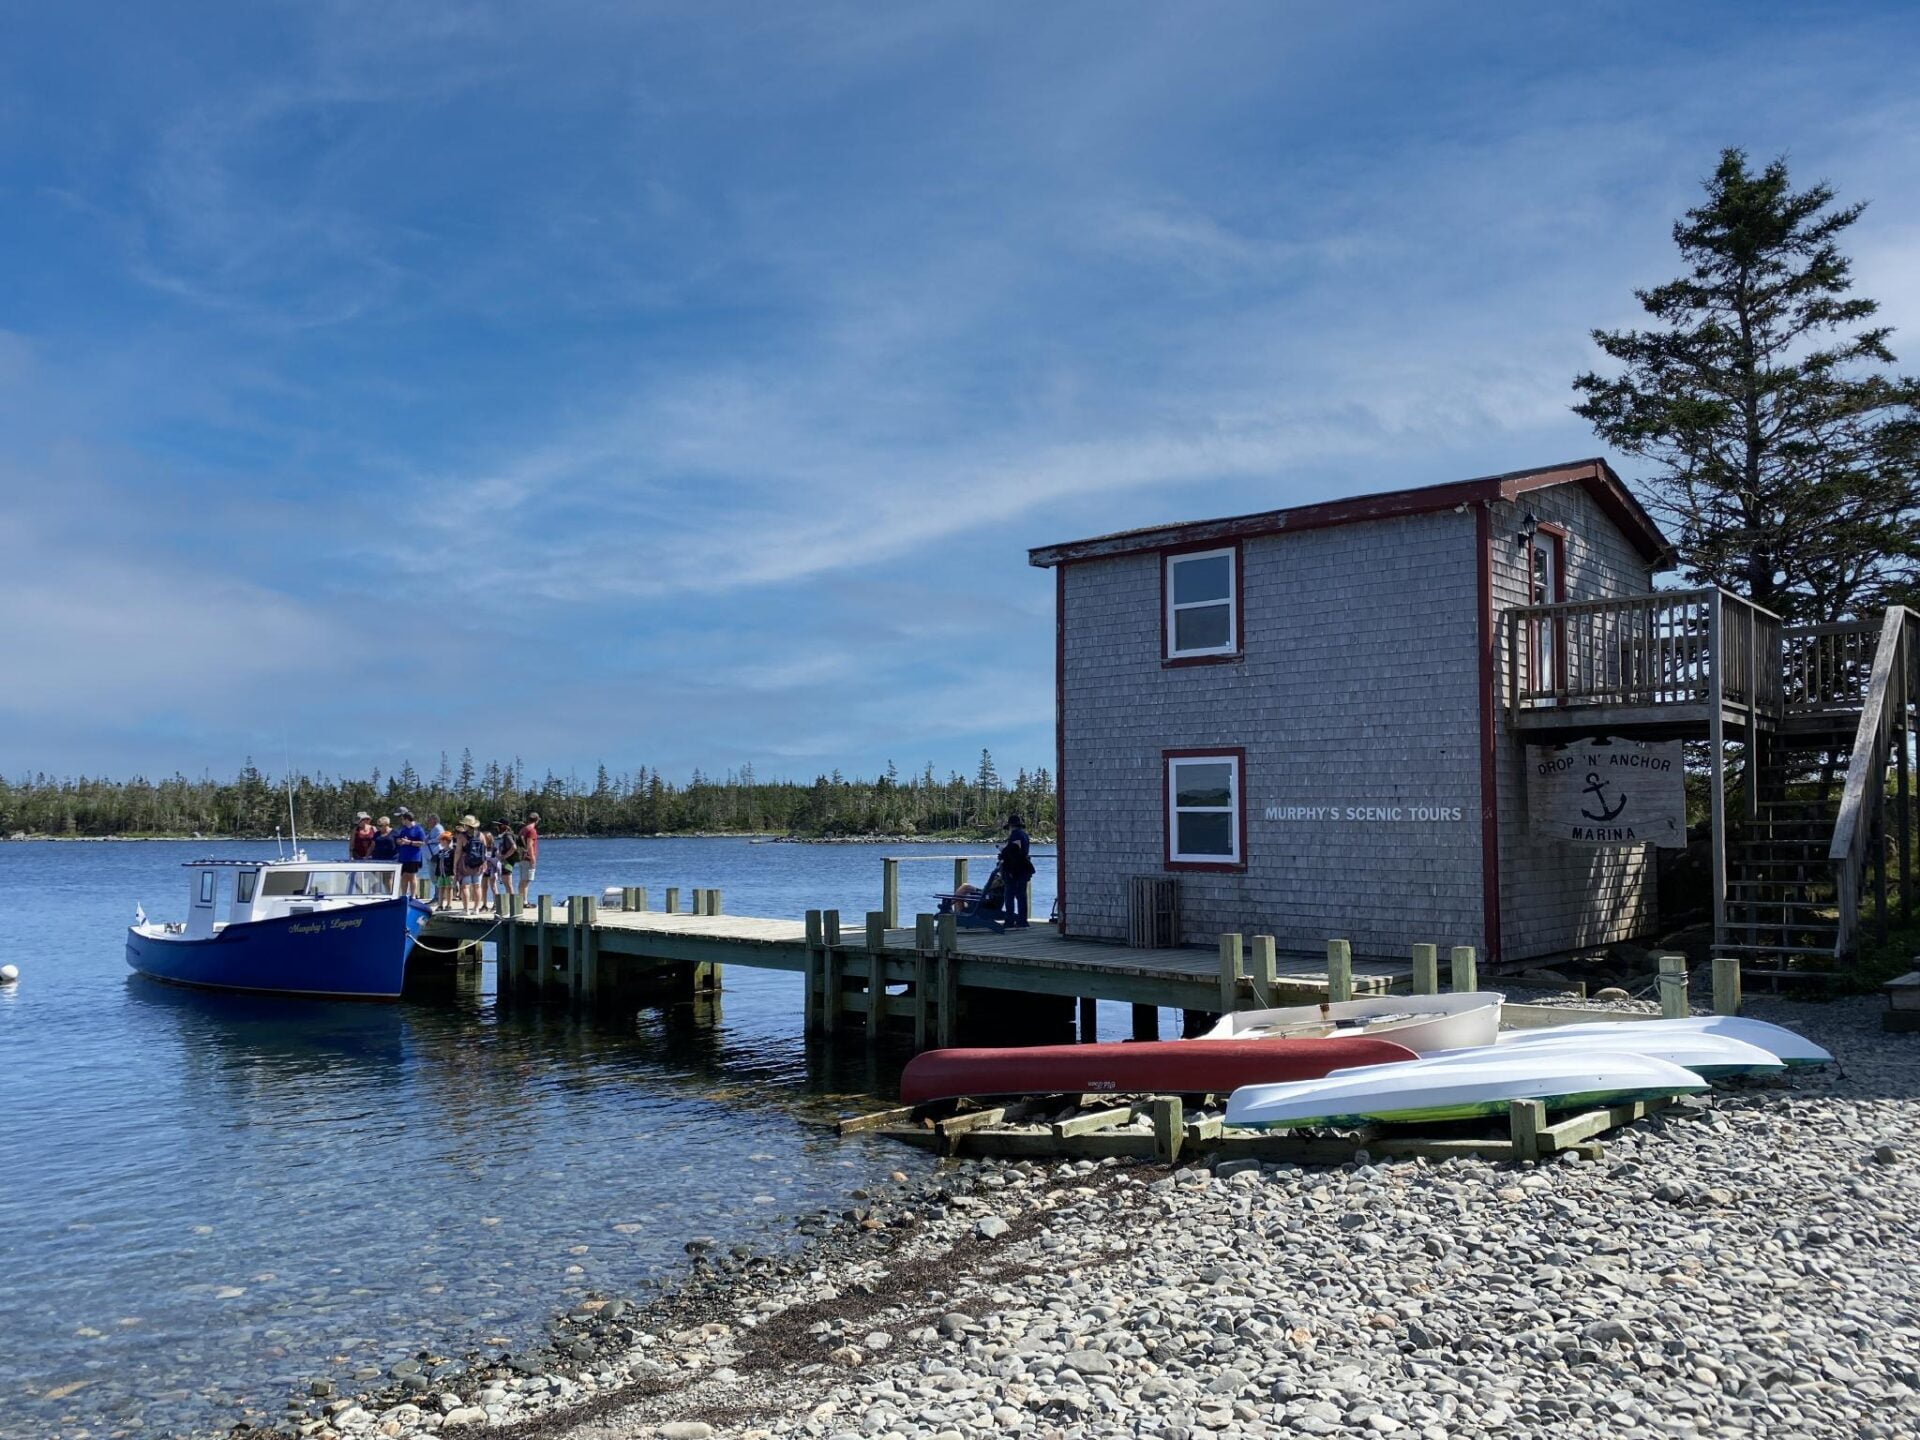 view of the building, dock and boats at murphy's scenic tours on our eastern shore road trip in nova scotia